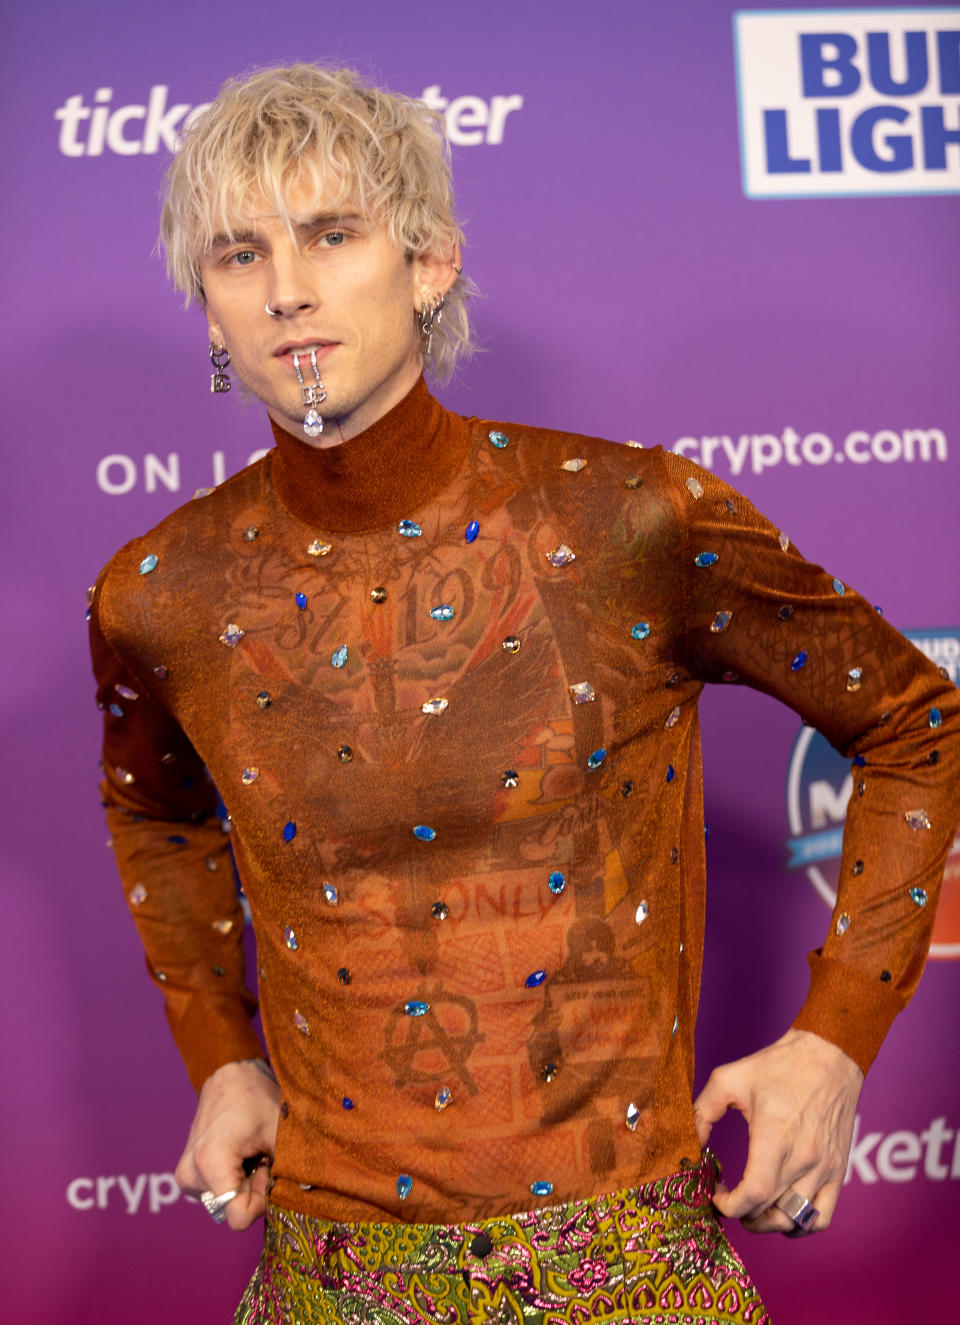 Machine Gun Kelly at Bud Light Super Bowl LVI Music Fest held at Crypto.com Arena on February 10, 2022 in Los Angeles, California. - Credit: Christopher Polk for Variety